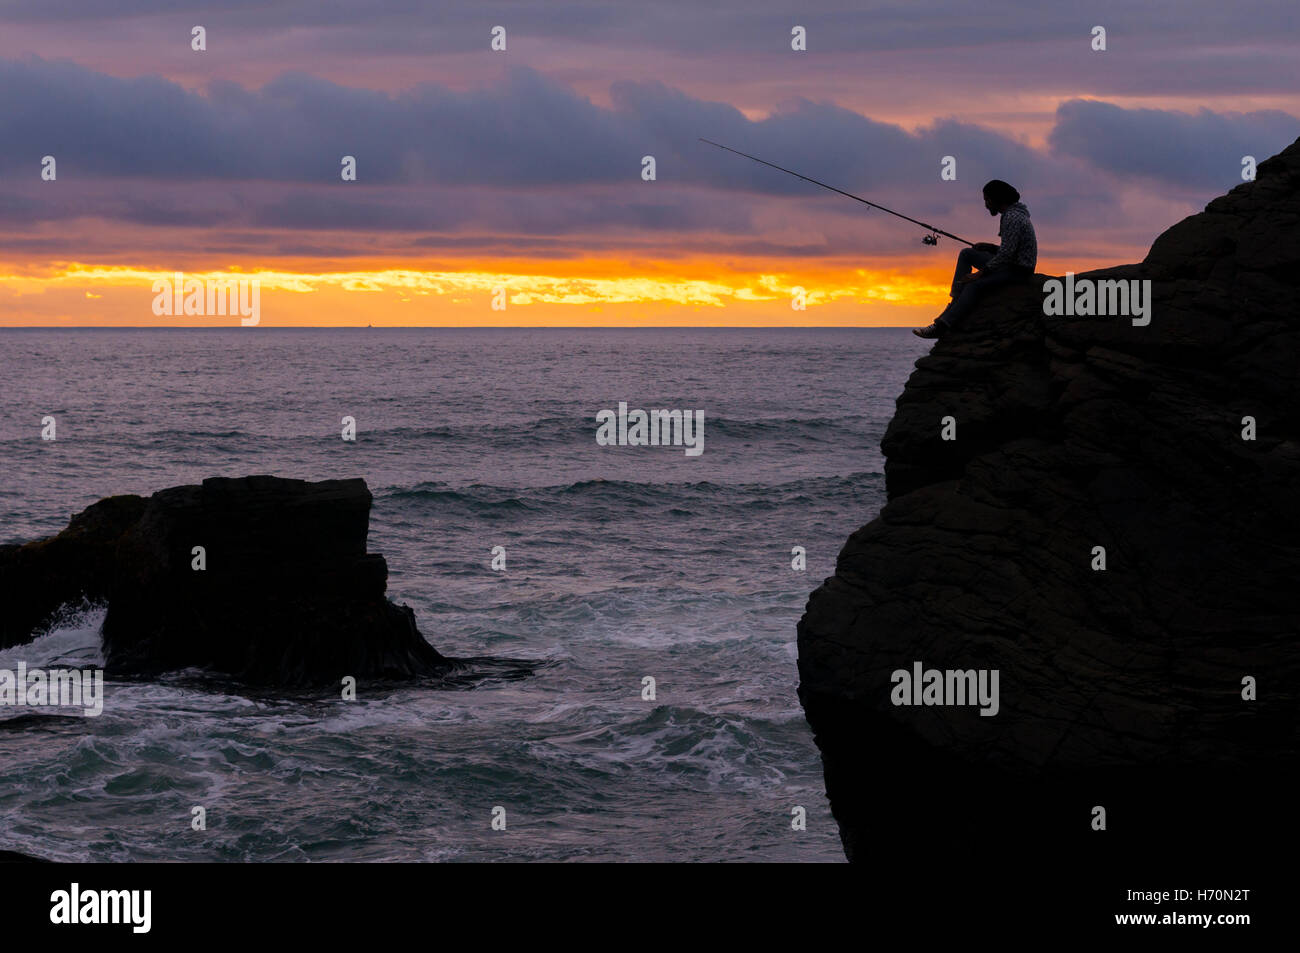 A man fishing on the coast of Chile Stock Photo